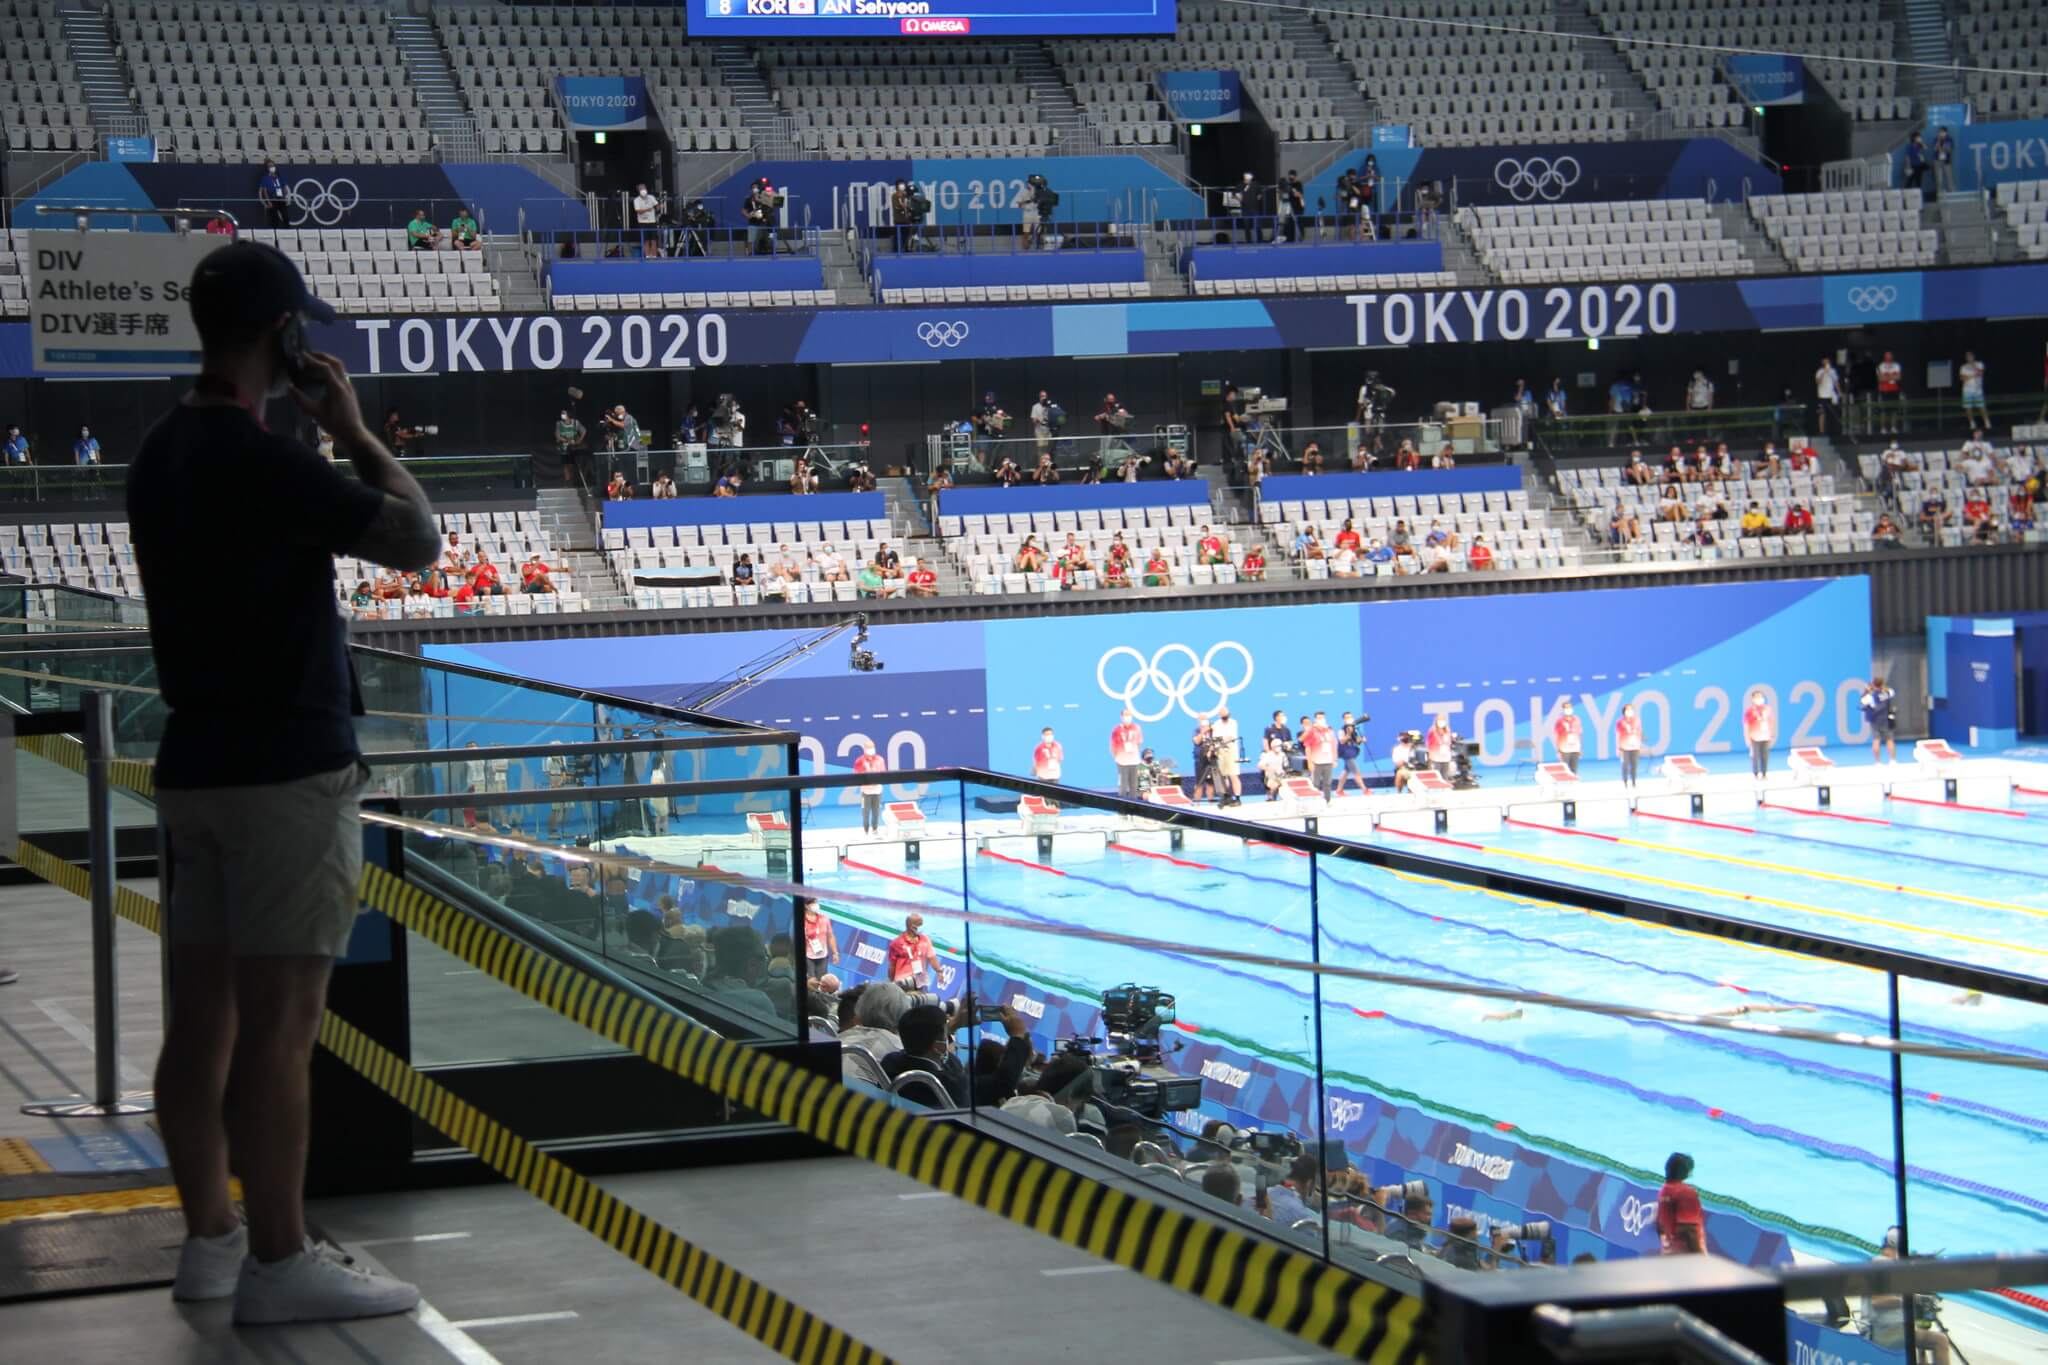 Swimmers in a big pool with tokyo olympics branding behind them